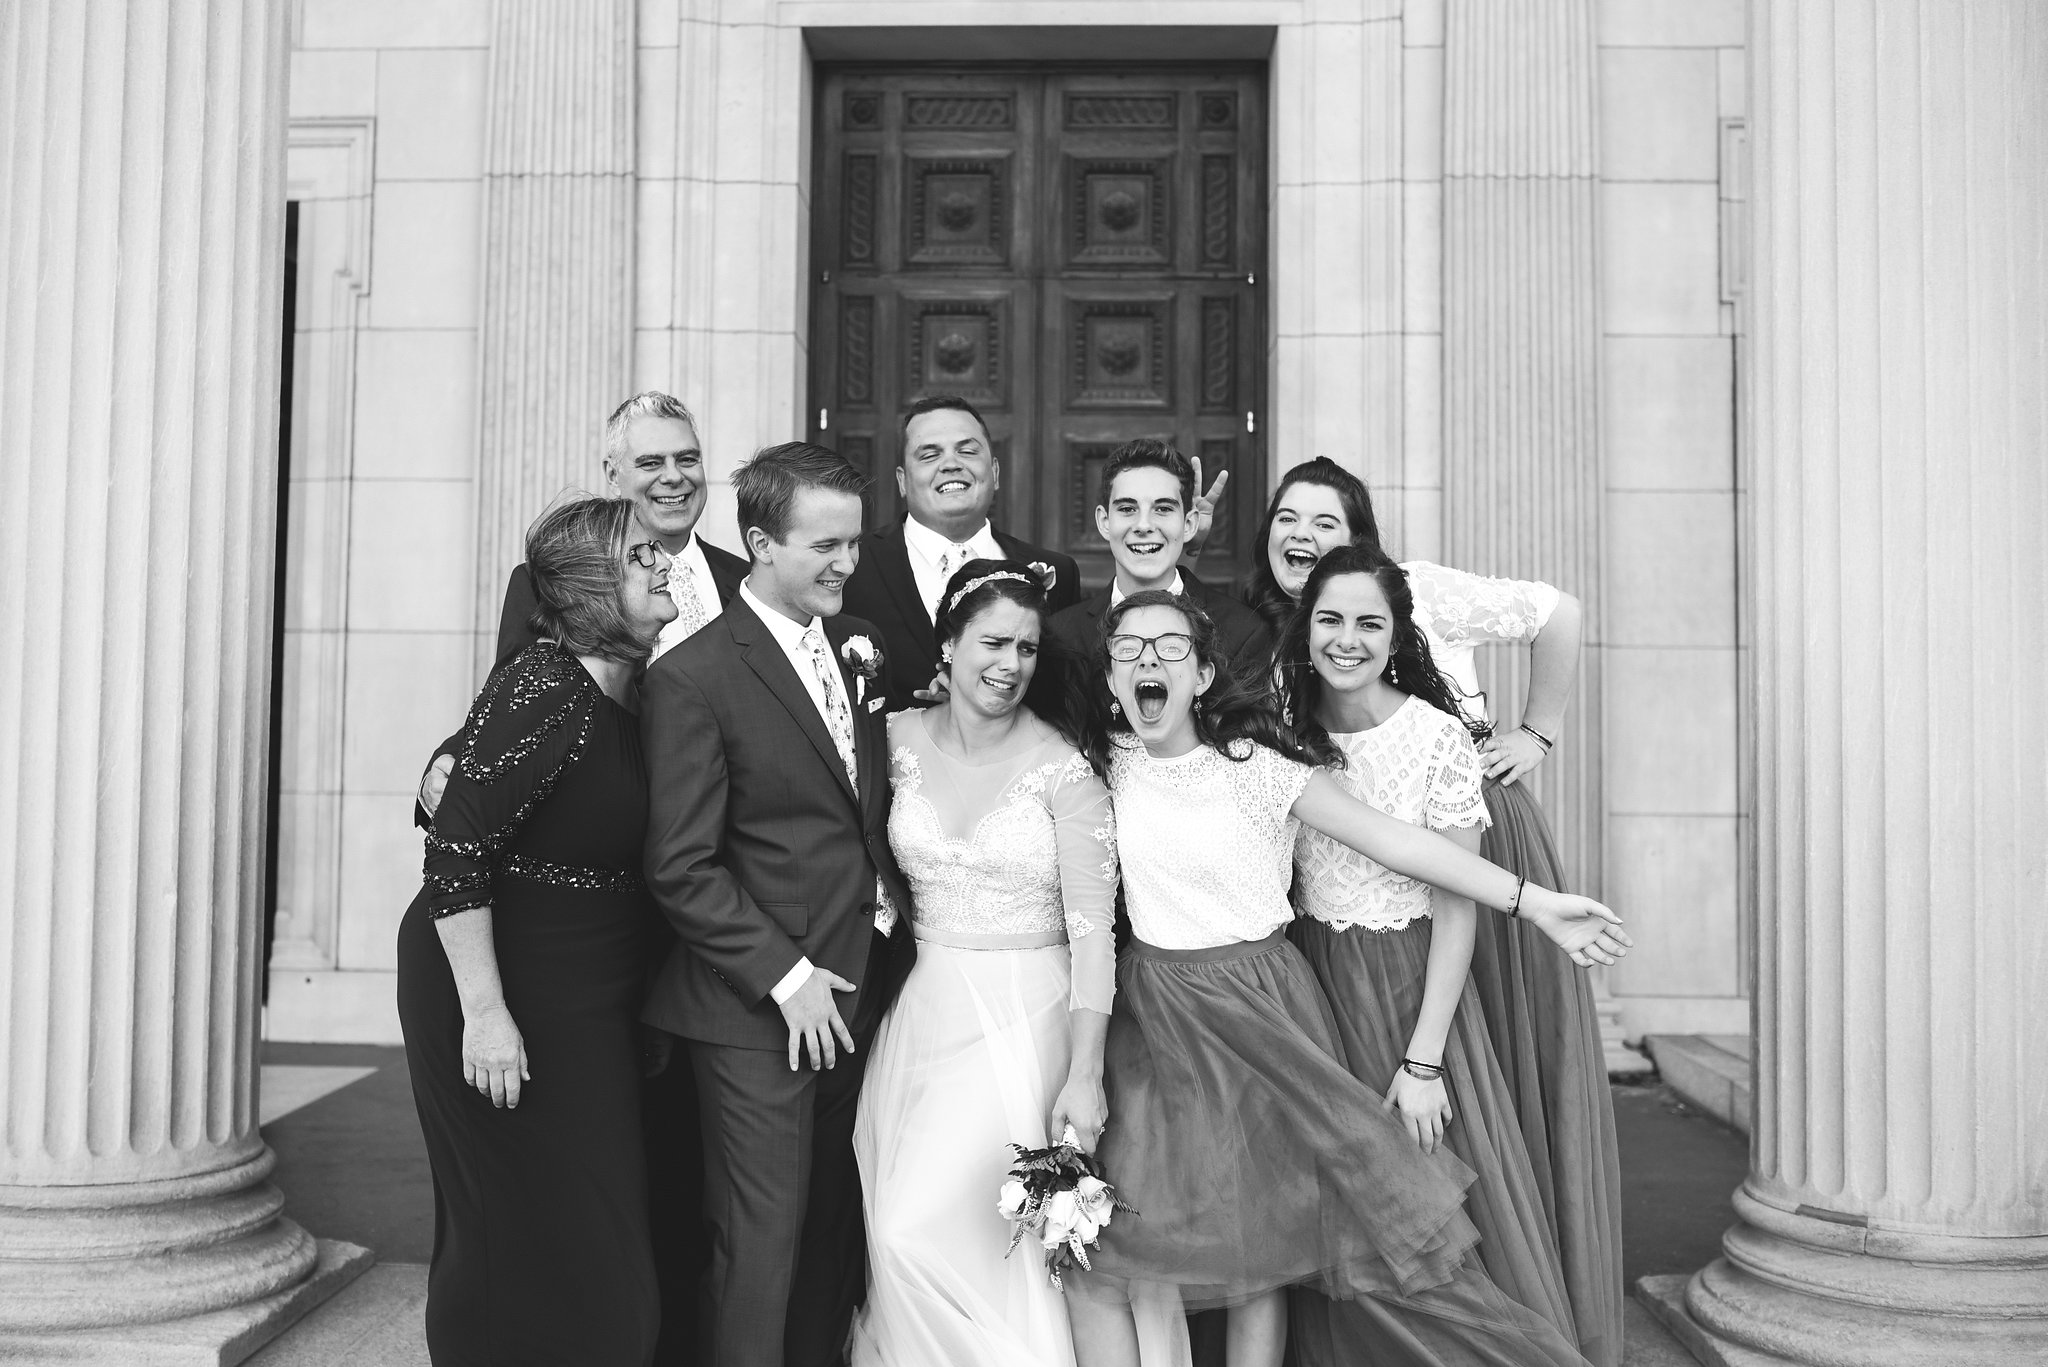  Baltimore, Canton, Church Wedding, Modern, Outdoors, Maryland Wedding Photographer, Romantic, Classic, St. Casimir Church, Silly portrait of bride and groom with family, black and white photo, lace bridesmaid dresses 